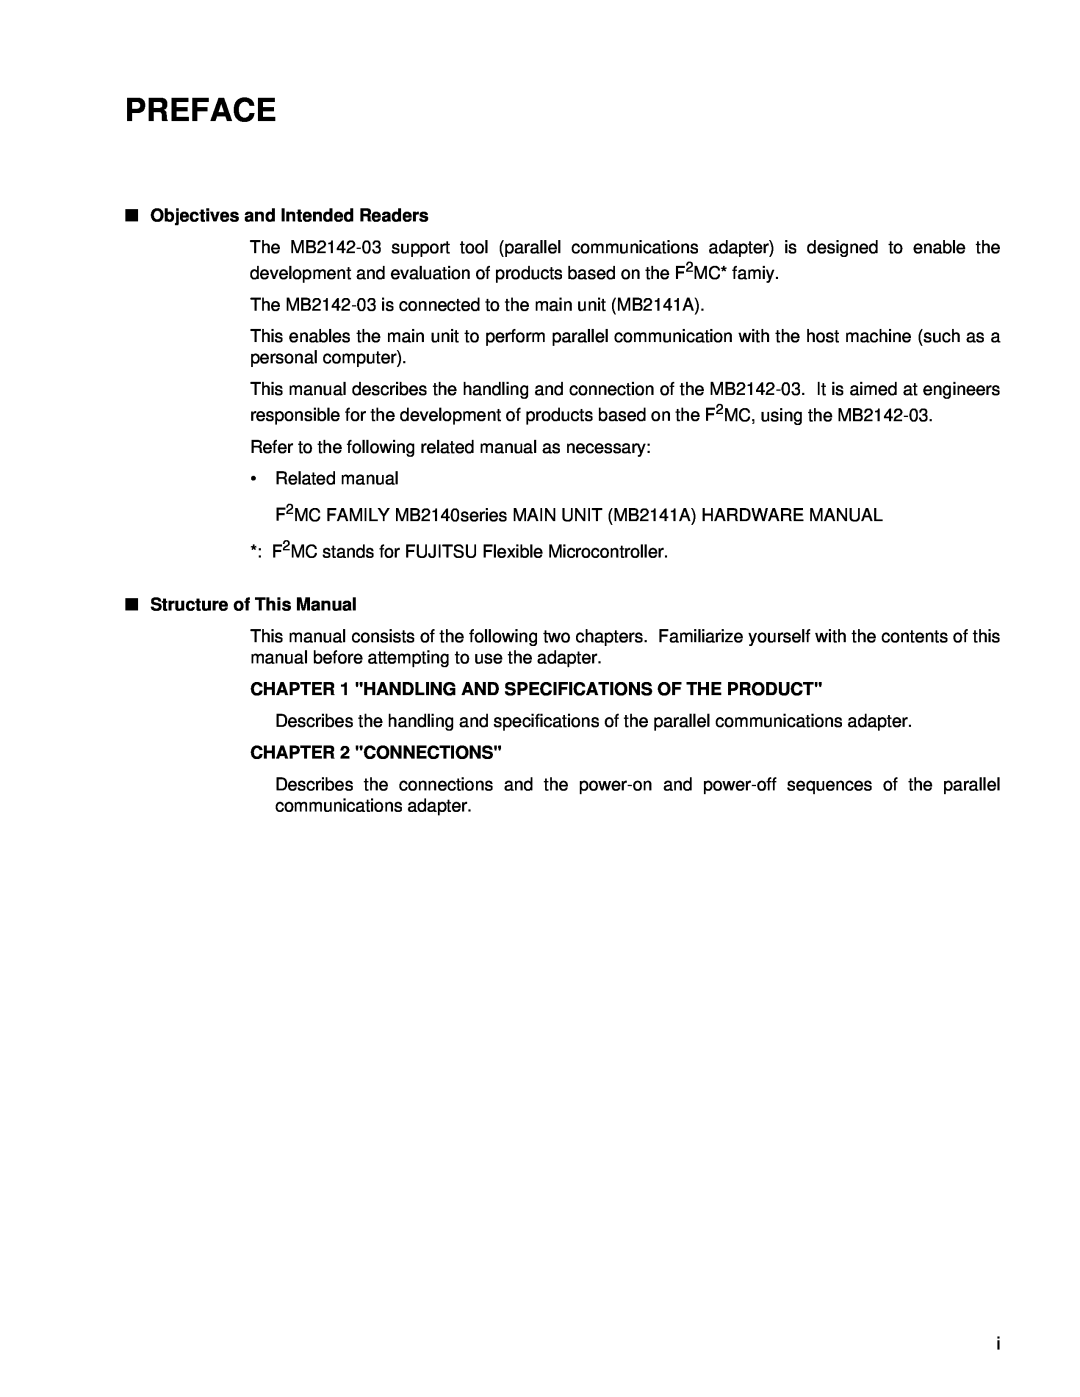 Fujitsu MB2142-03 manual Preface, Objectives and Intended Readers, Structure of This Manual, Connections 